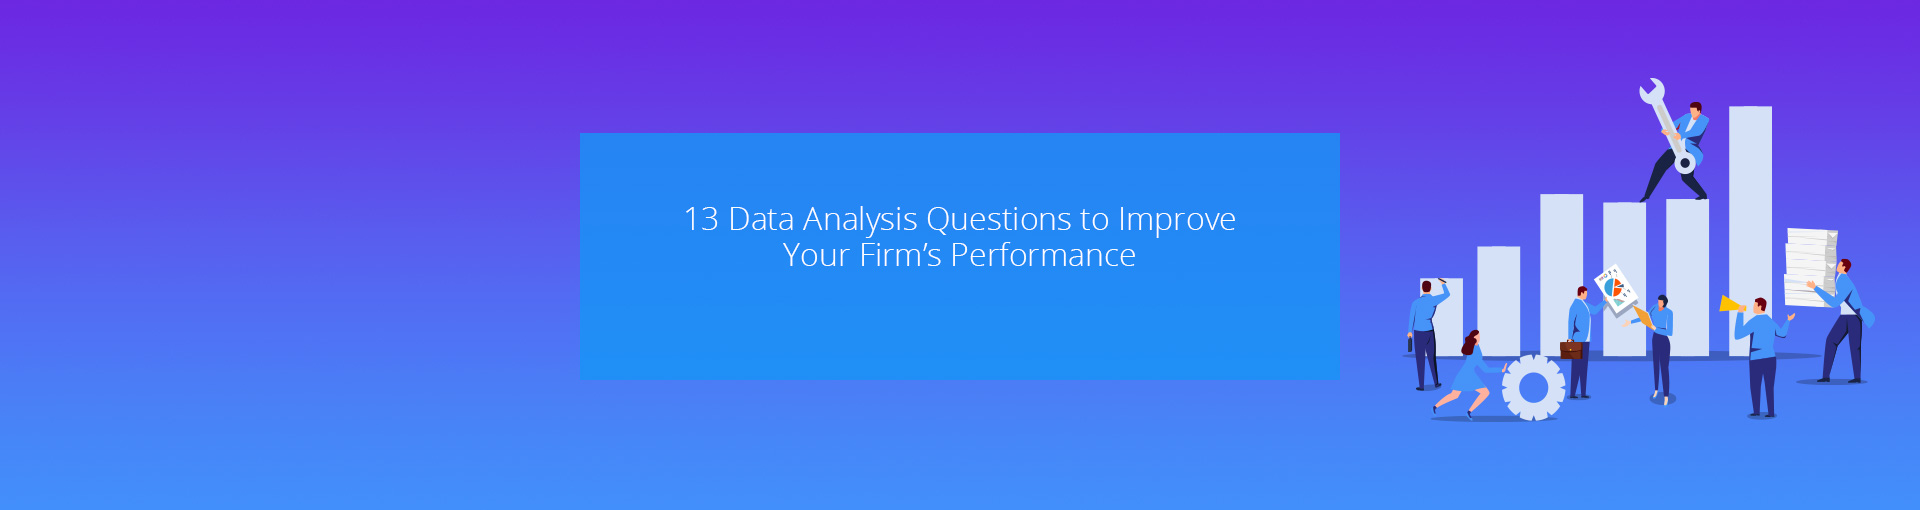 13 Data Analysis Questions to Improve Your Firm’s Performance Featured Image